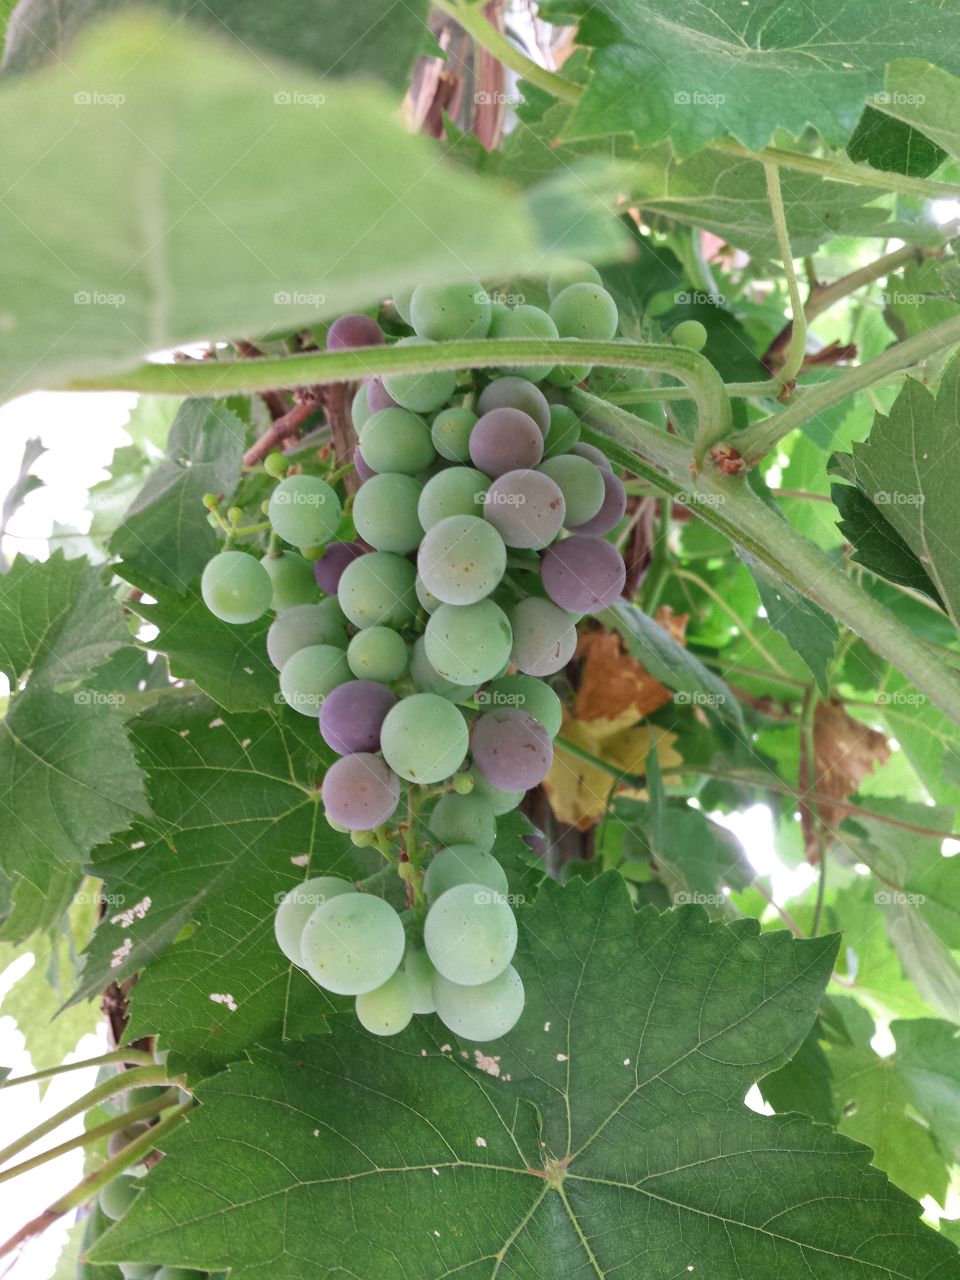 Grapes. grapes in Hungary